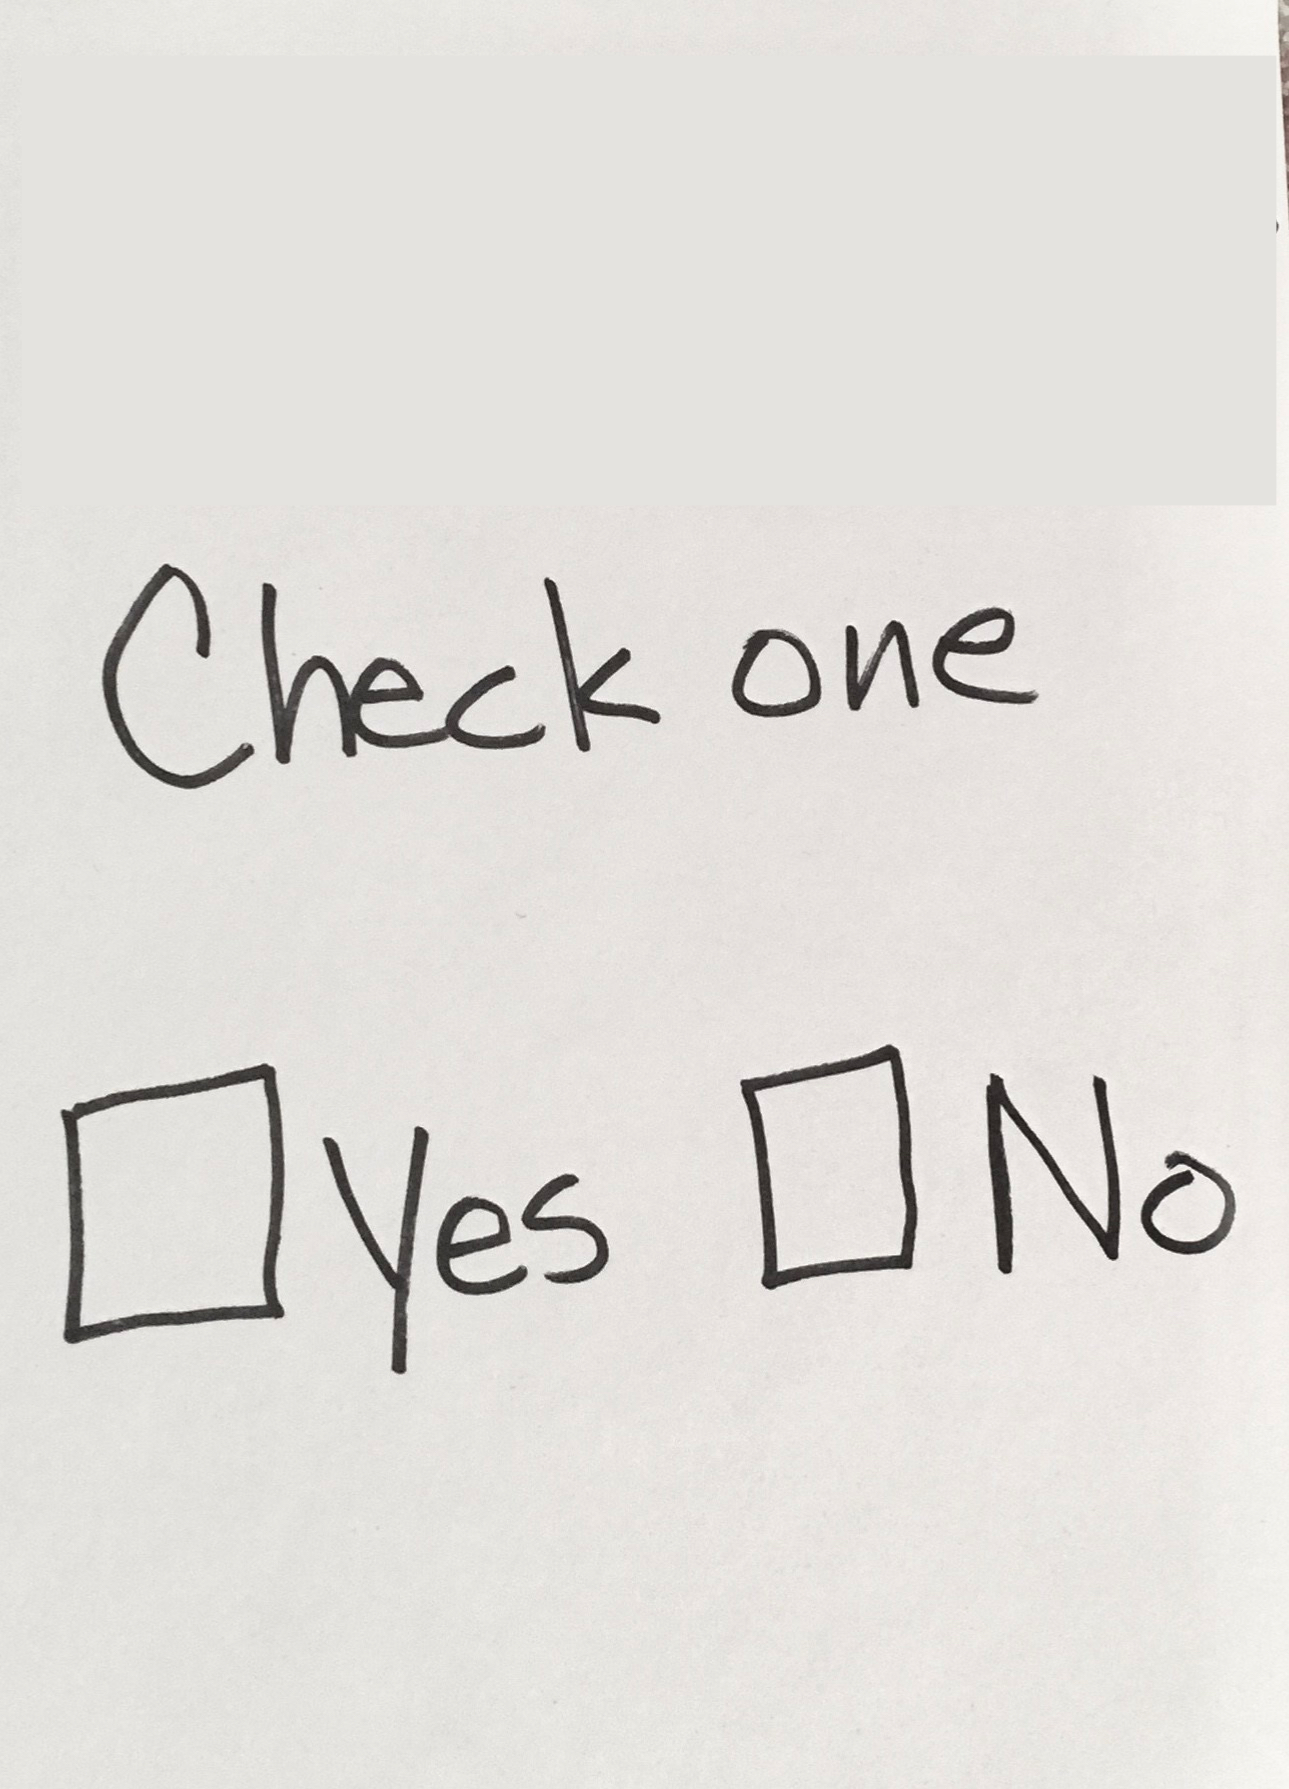 High Quality check one yes or no Blank Meme Template